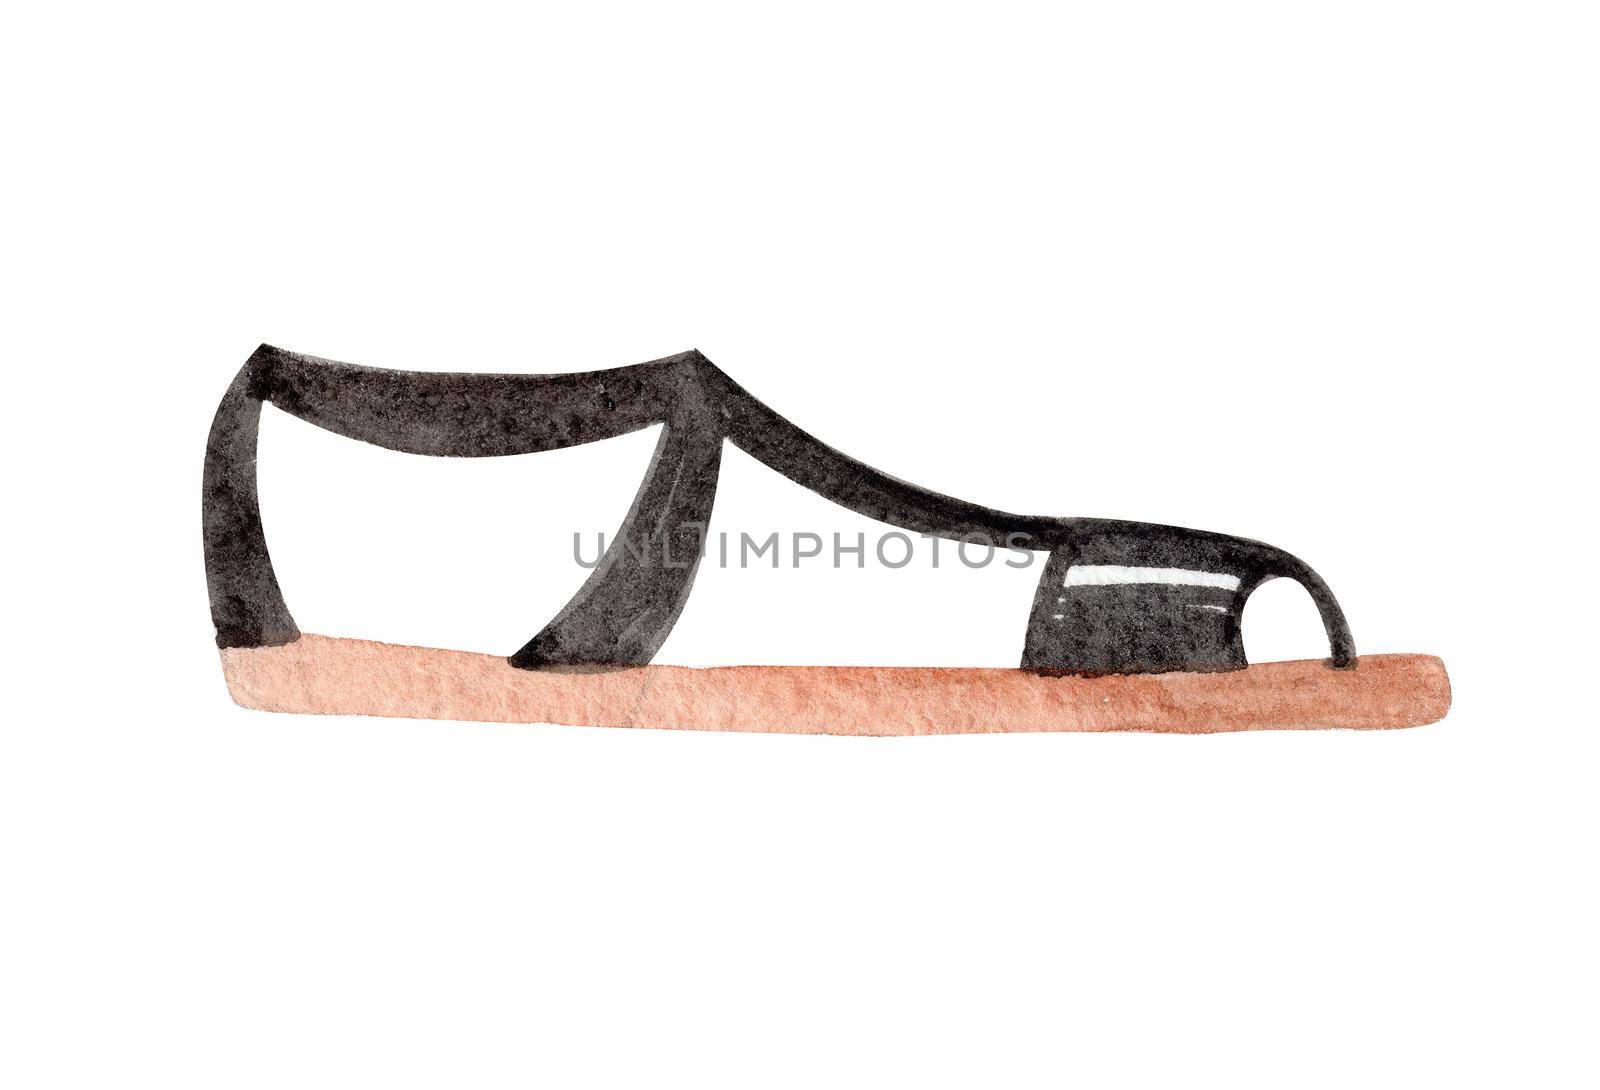 watercolor black women shoes side view isolated on white background by dreamloud